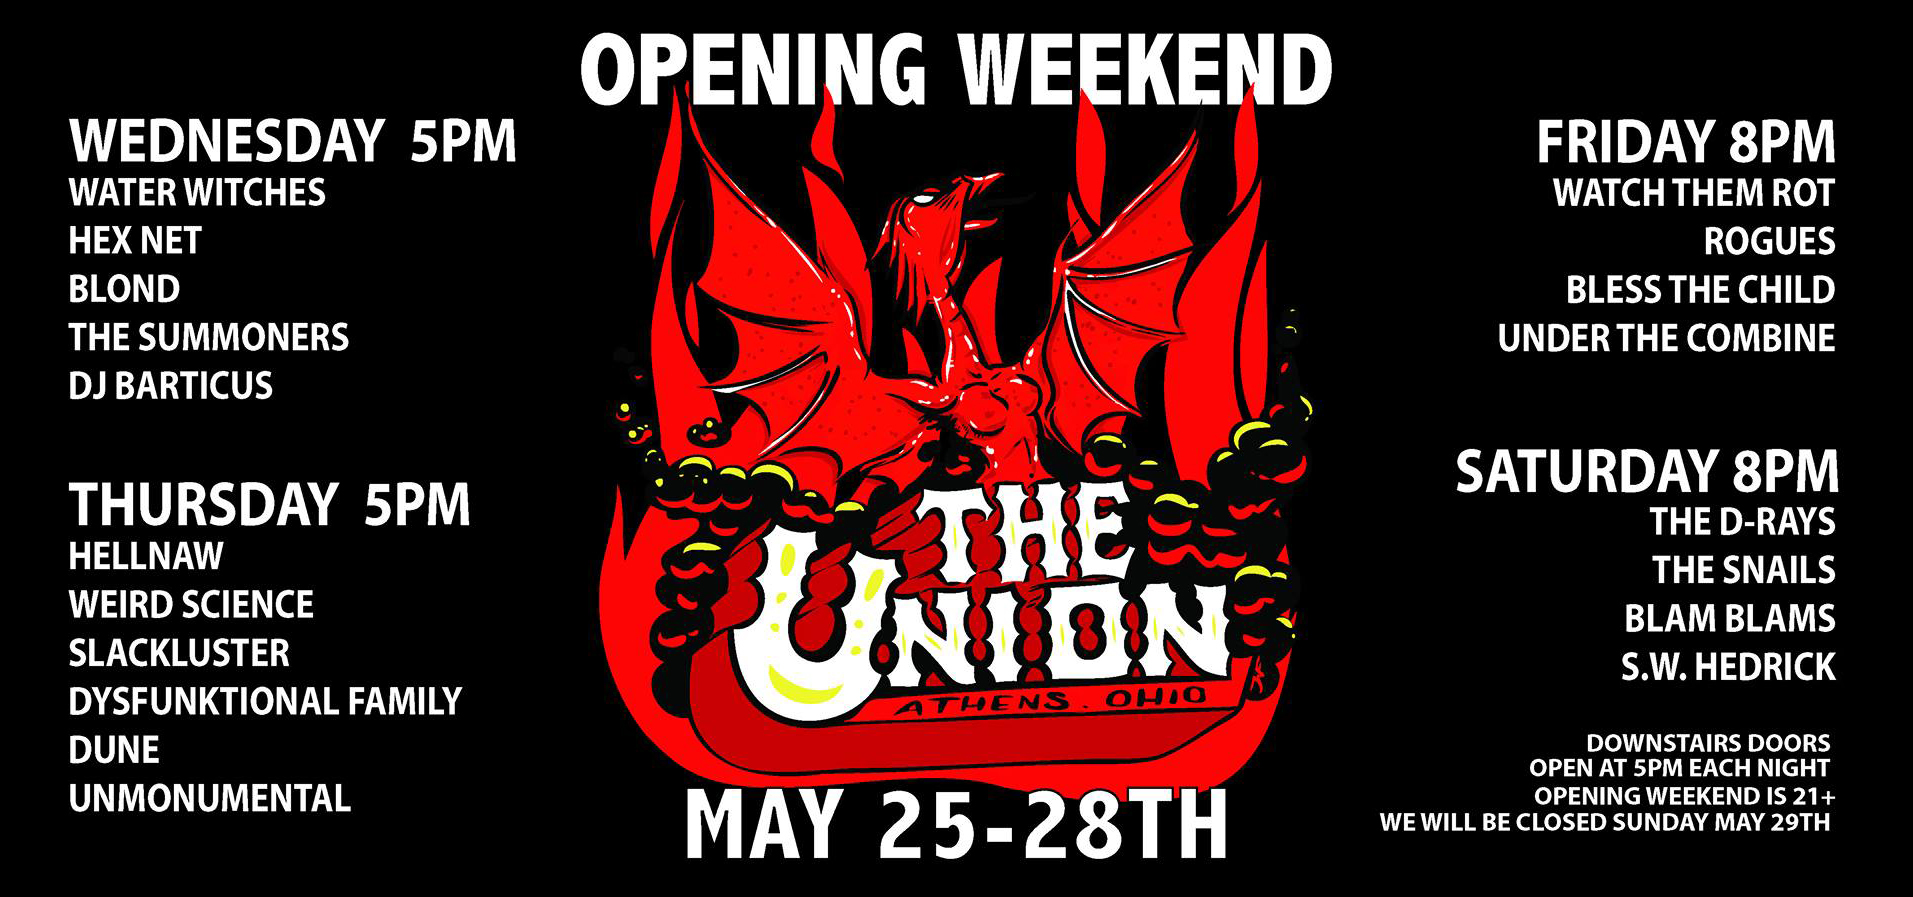 THE UNION OPENING WEEKEND!!!